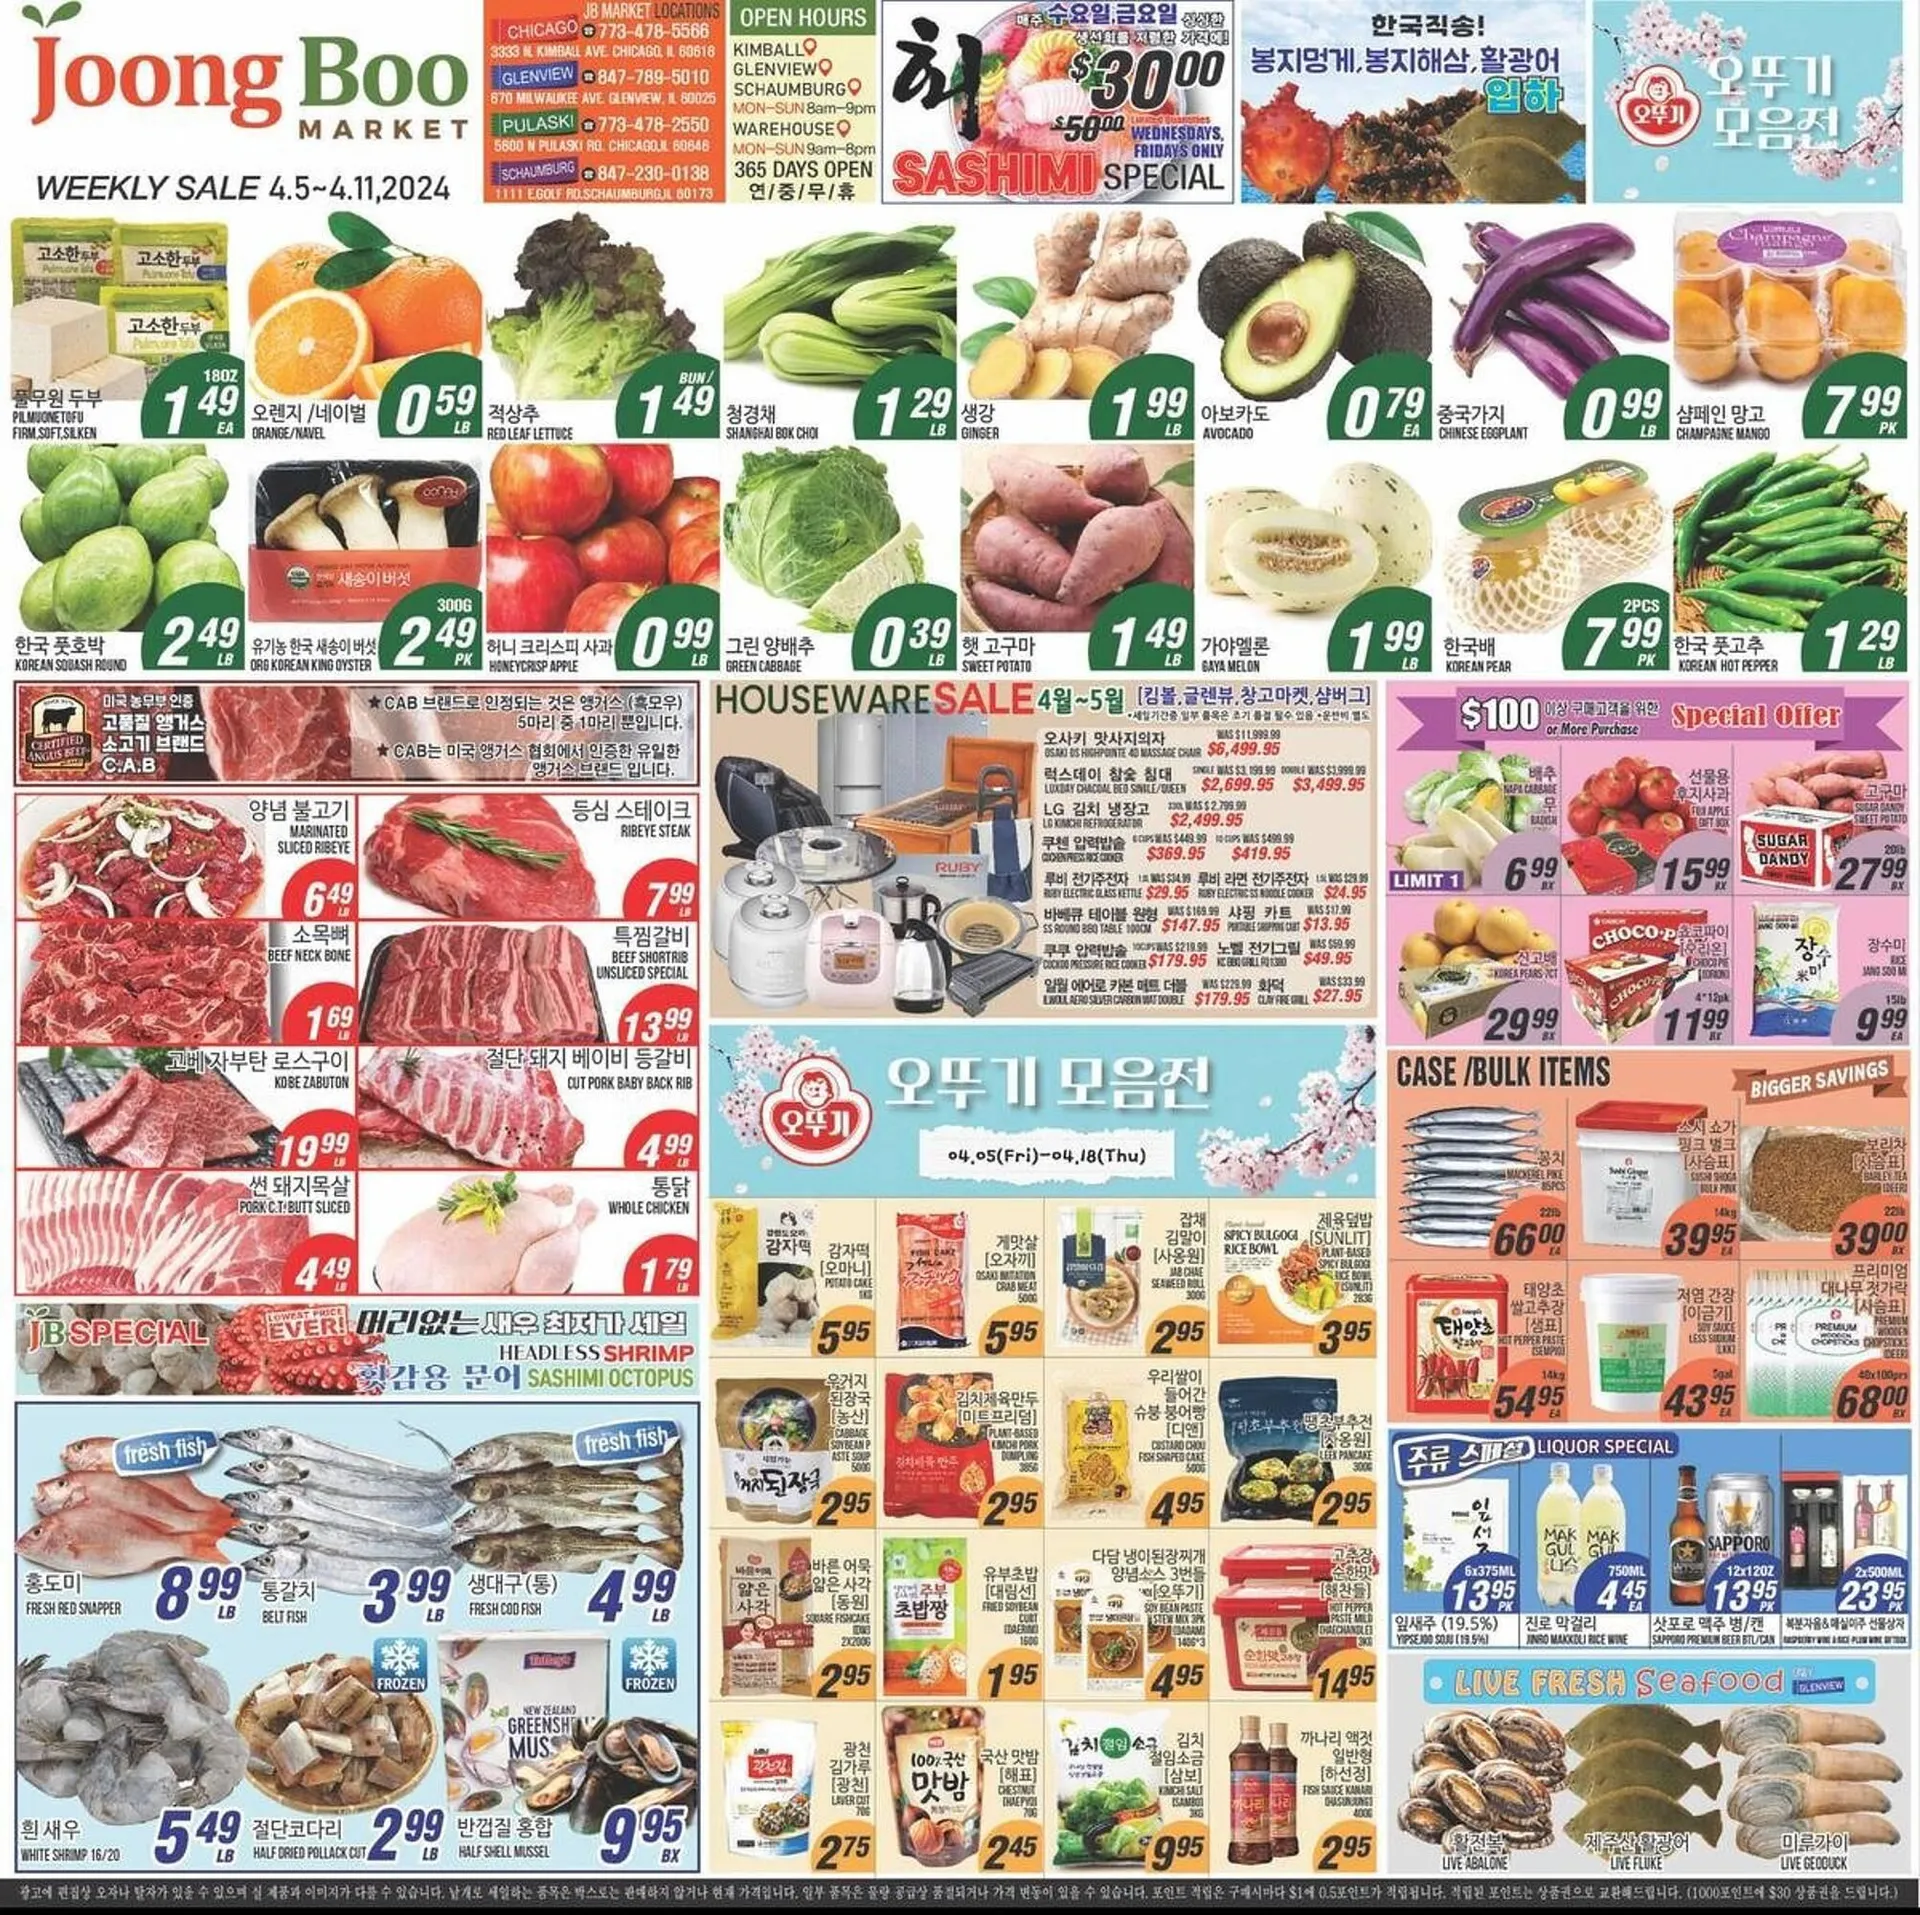 Weekly ad Joong Boo Market Weekly Ad from April 5 to April 11 2024 - Page 